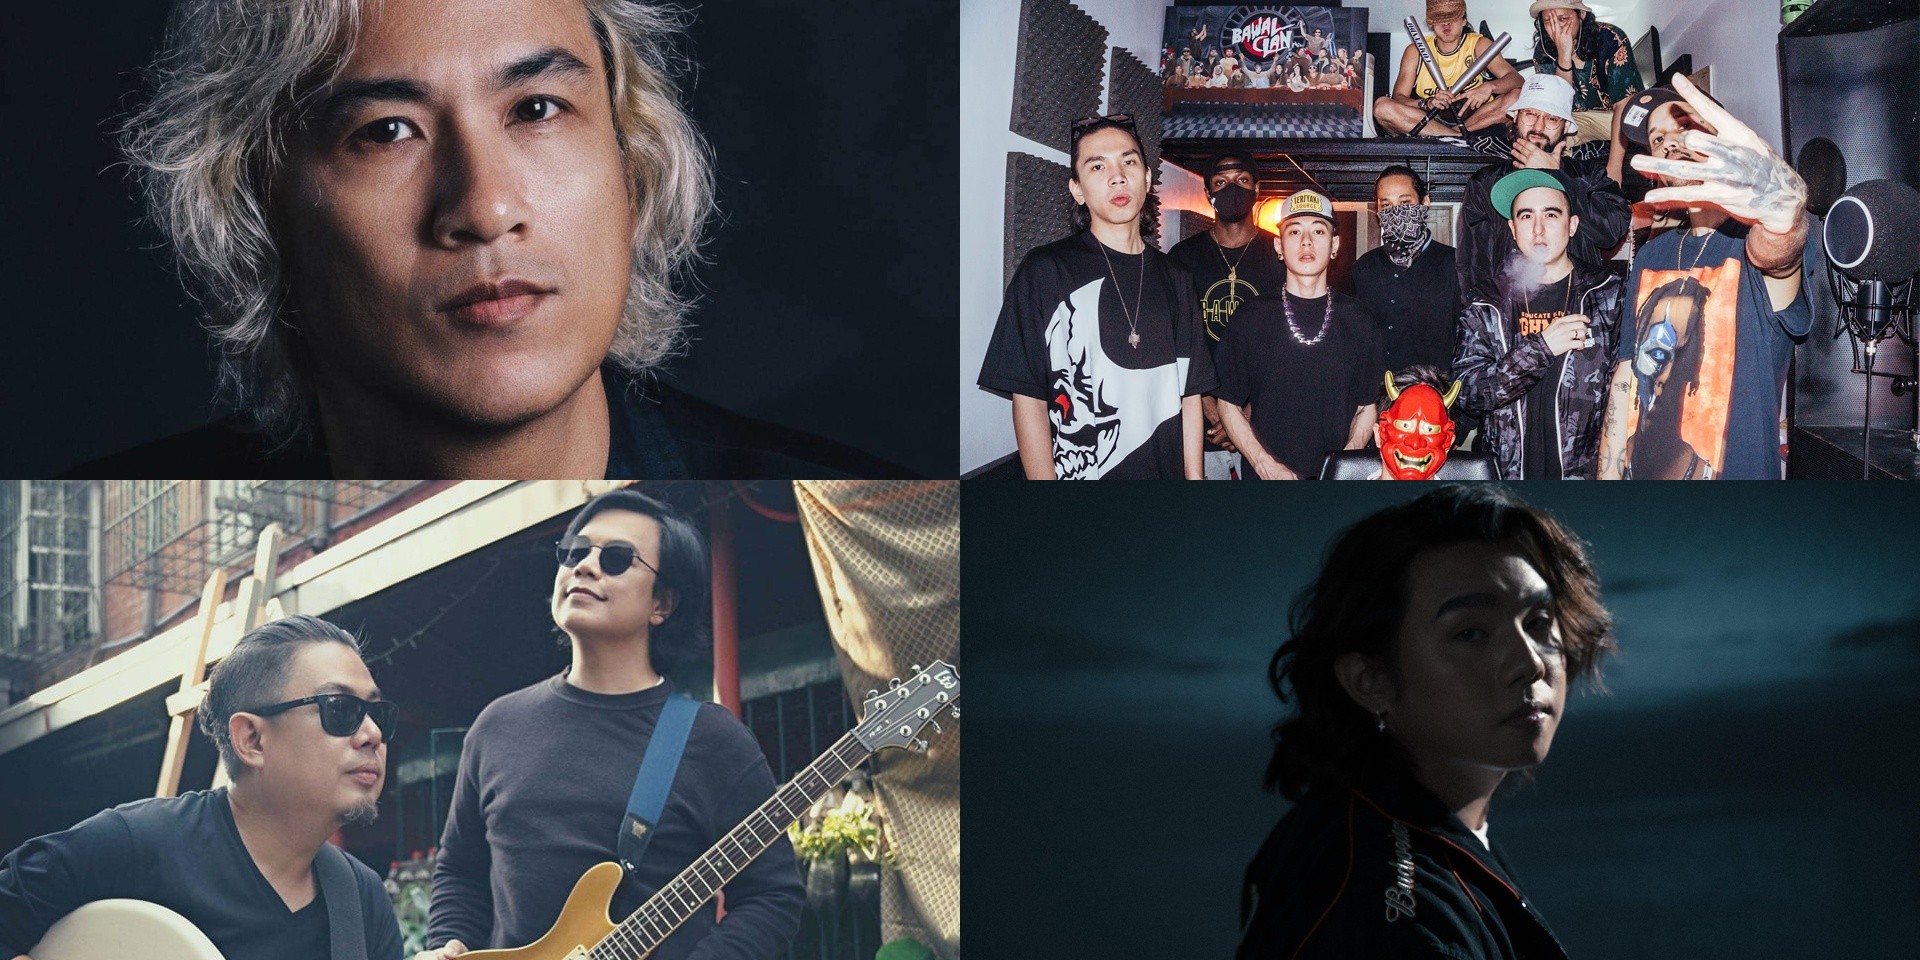 Ely Buendia, Bawal Clan, SUZARA, Zack Tabudlo, and more release new music – listen